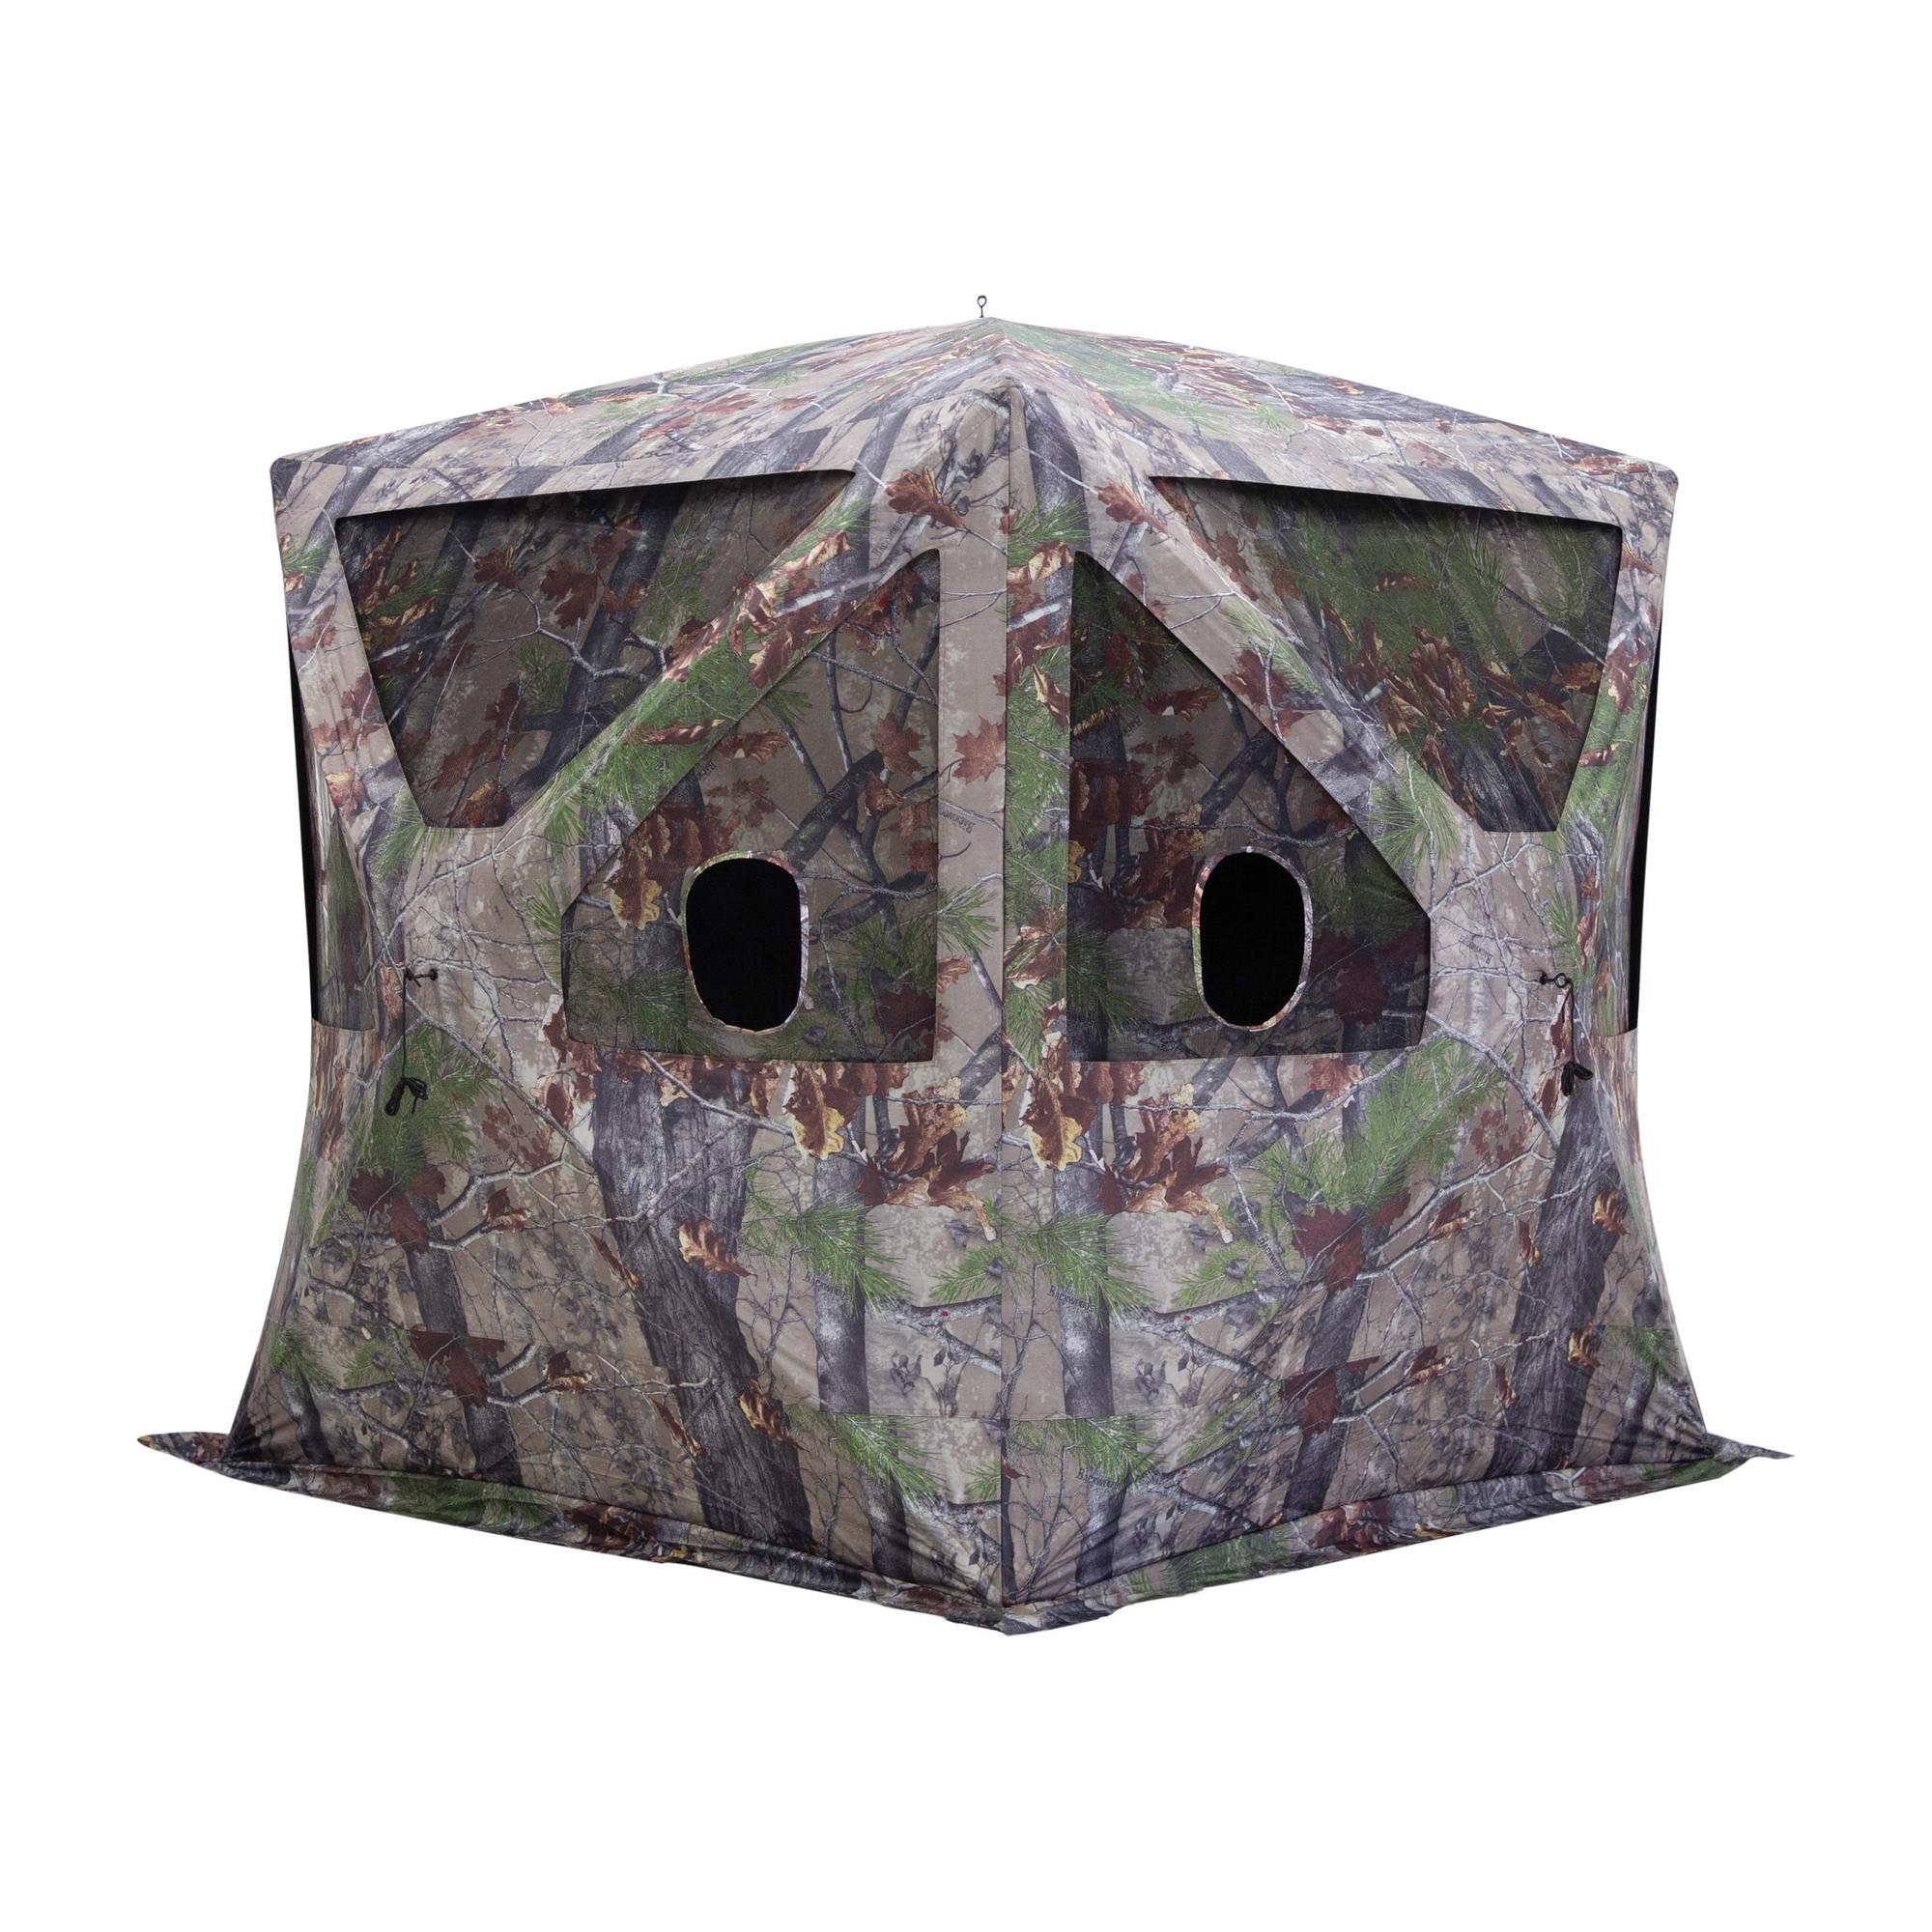 Barronett Blinds, Big Cat Portable Hunting Blind, 3-Person Capacity, Color Camouflage, Material Polyester, Model BC350BW